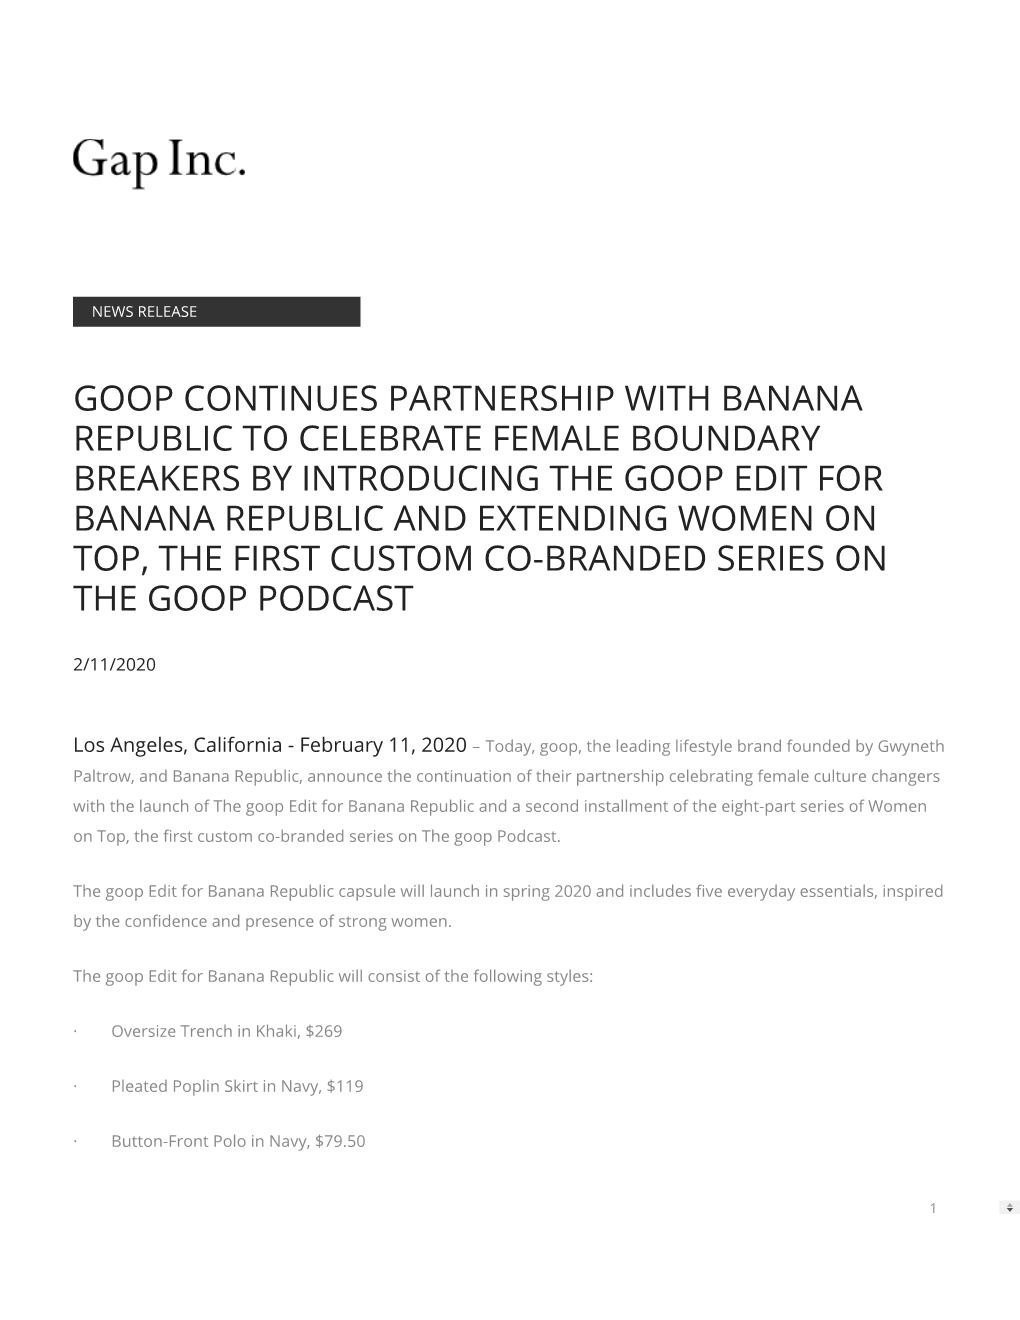 Goop Continues Partnership with Banana Republic To